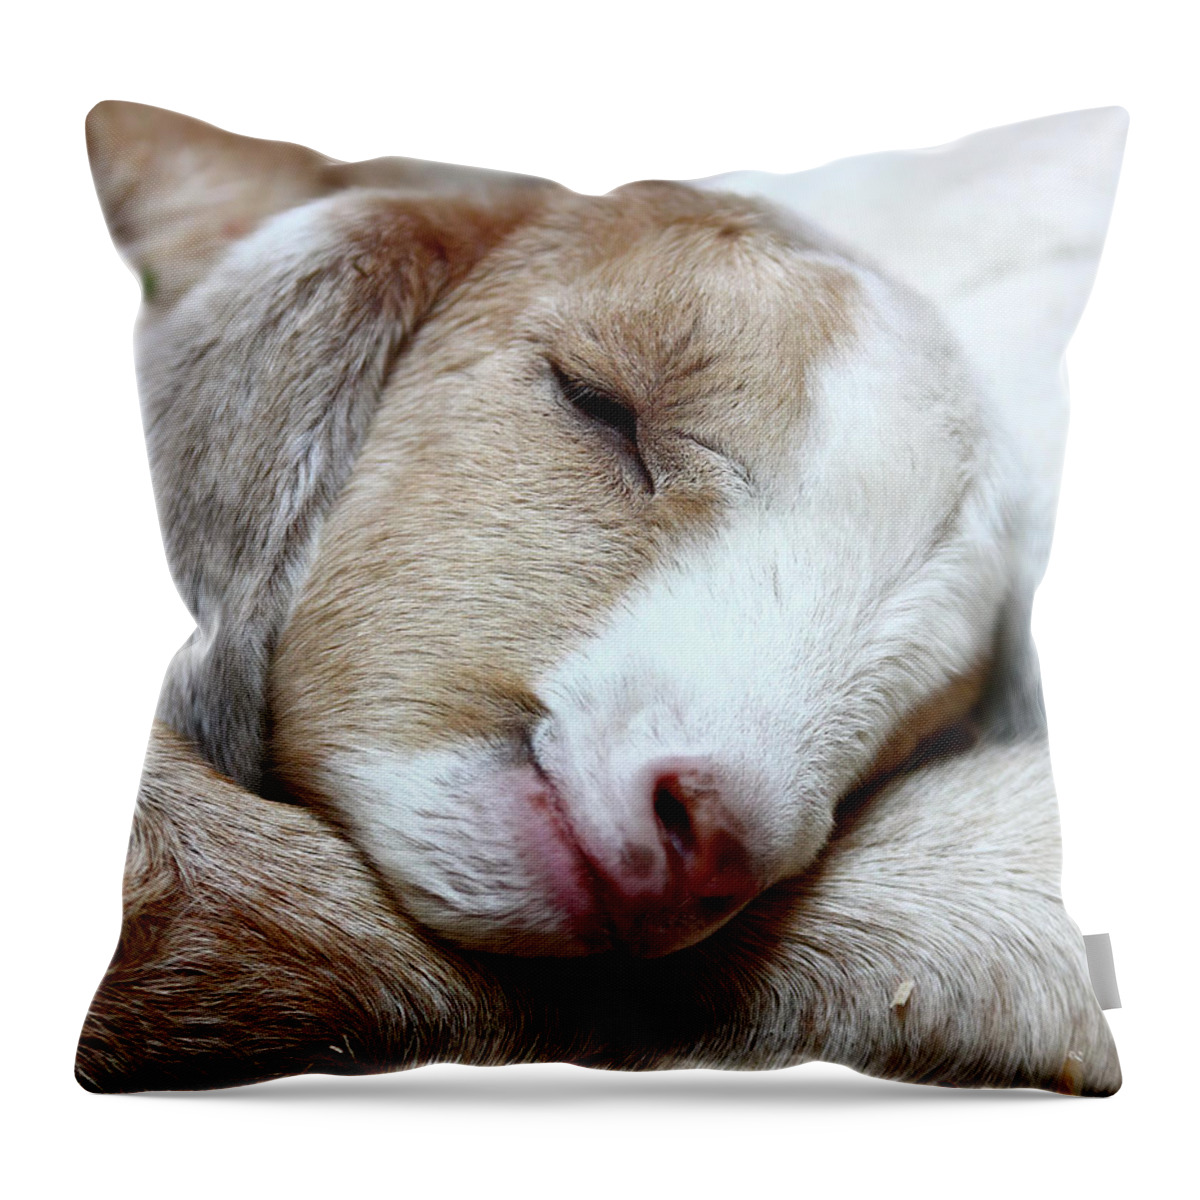 Farm Throw Pillow featuring the photograph Sleeping Kid by Lens Art Photography By Larry Trager